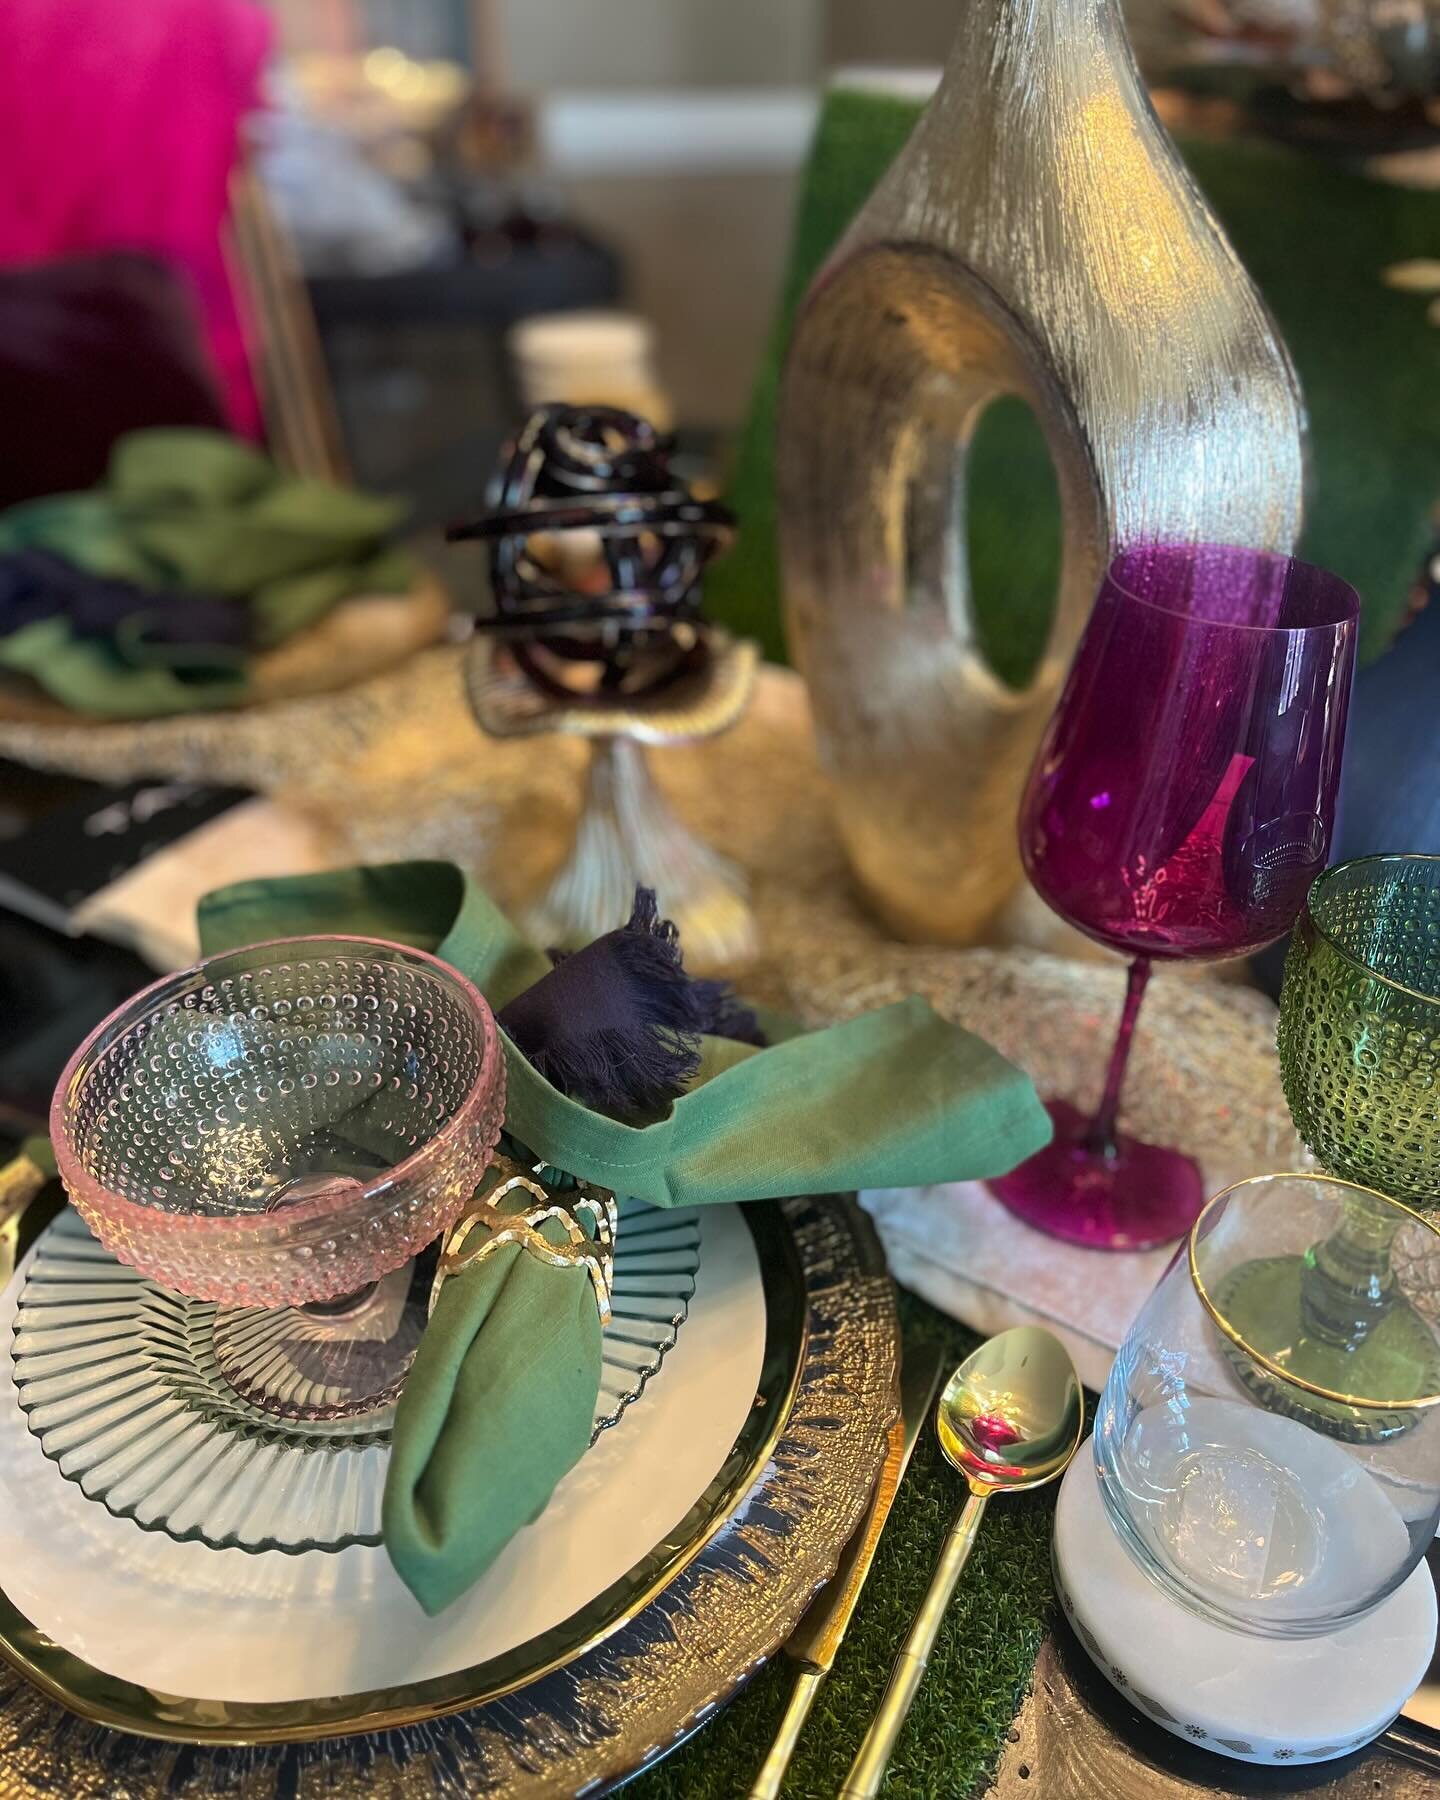 SNEAK PEEK! This year Tablescapes is pairing impactful, memorable experiences with each Tablescape. Showcasing our Sunset Dinner Party Tablescape paired with your very own LIVE BARTENDER EXPERIENCE by @moe_tipsy_bar and @wines4humanity ! Nightlife on